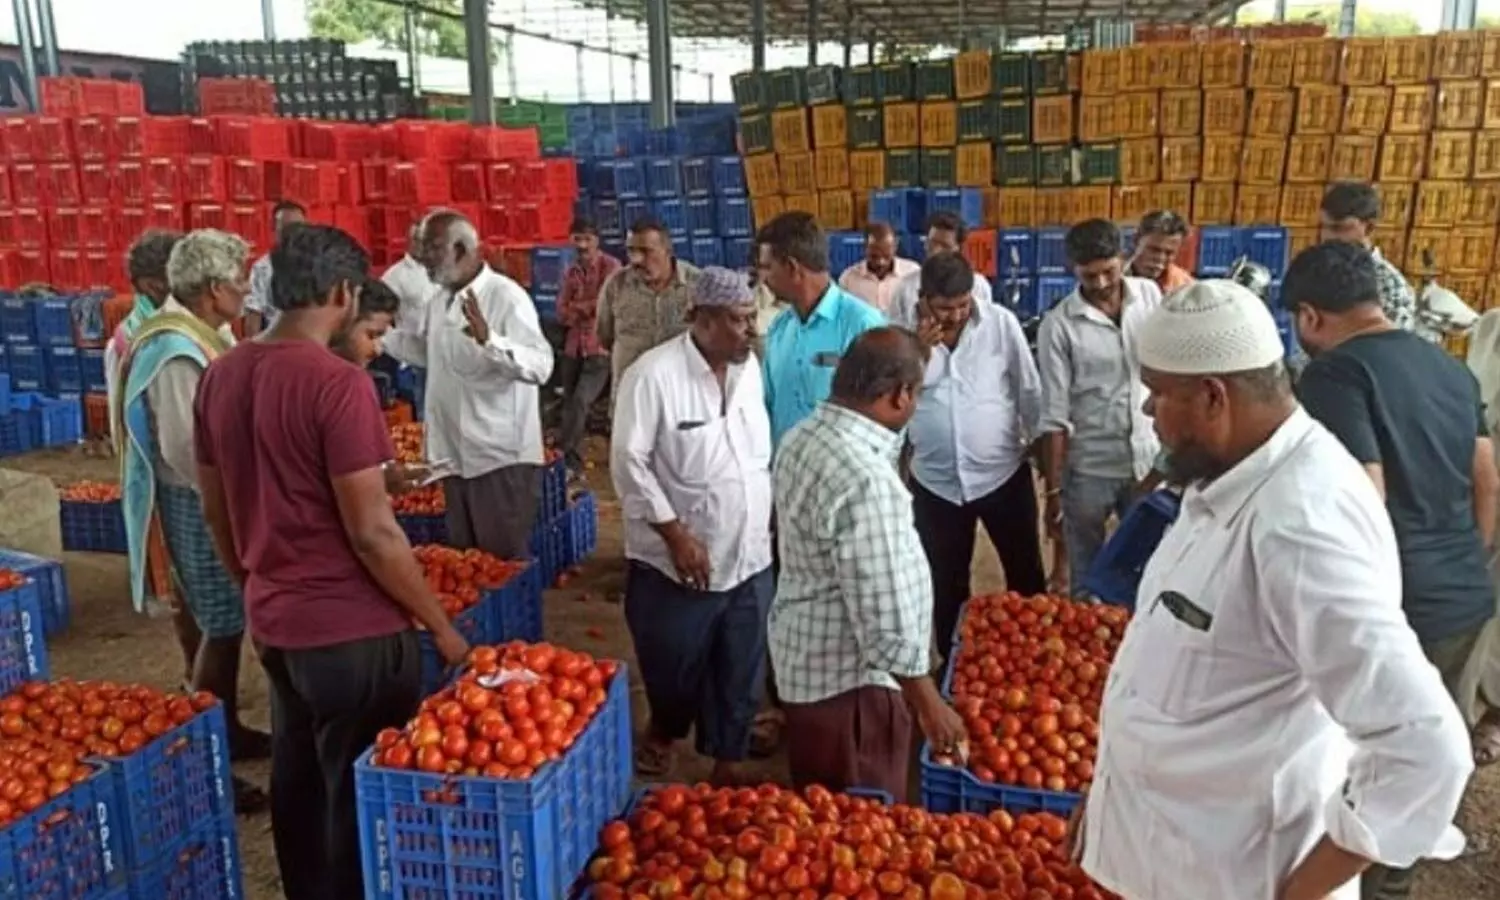 Wholesale price of tomato drops to Rs 21 per kg in Madanapalle!